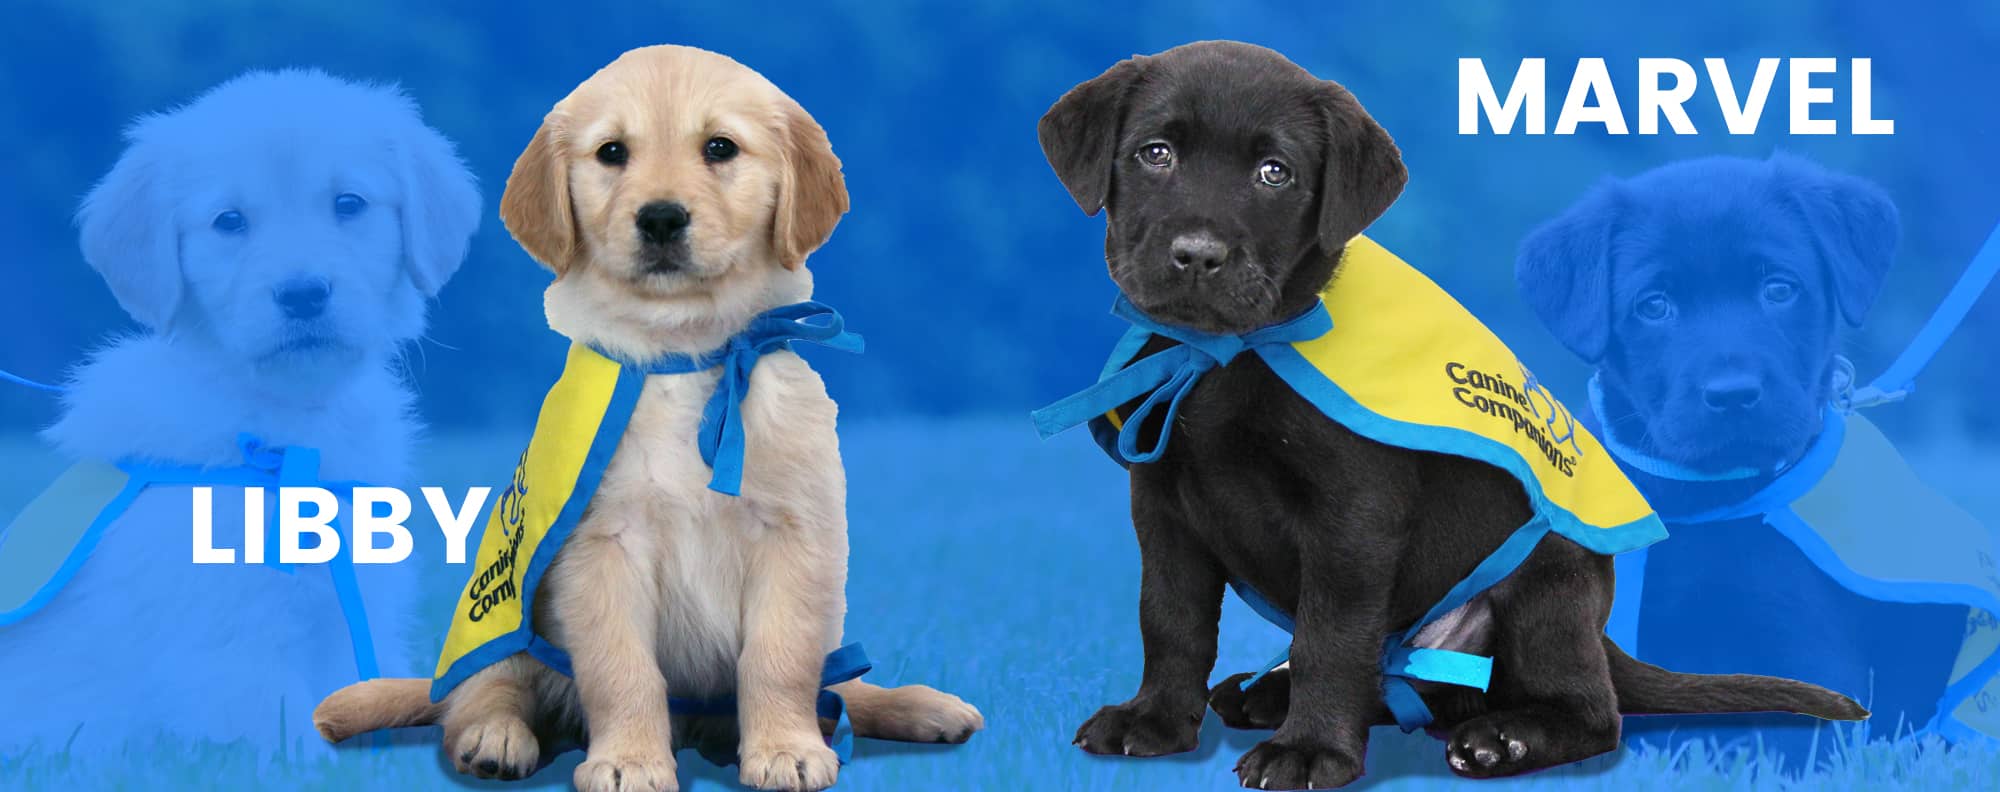 Blue banner with a golden retriever puppy and black lab puppy in puppy capes. The names Libby and Marvel are written in capital letters